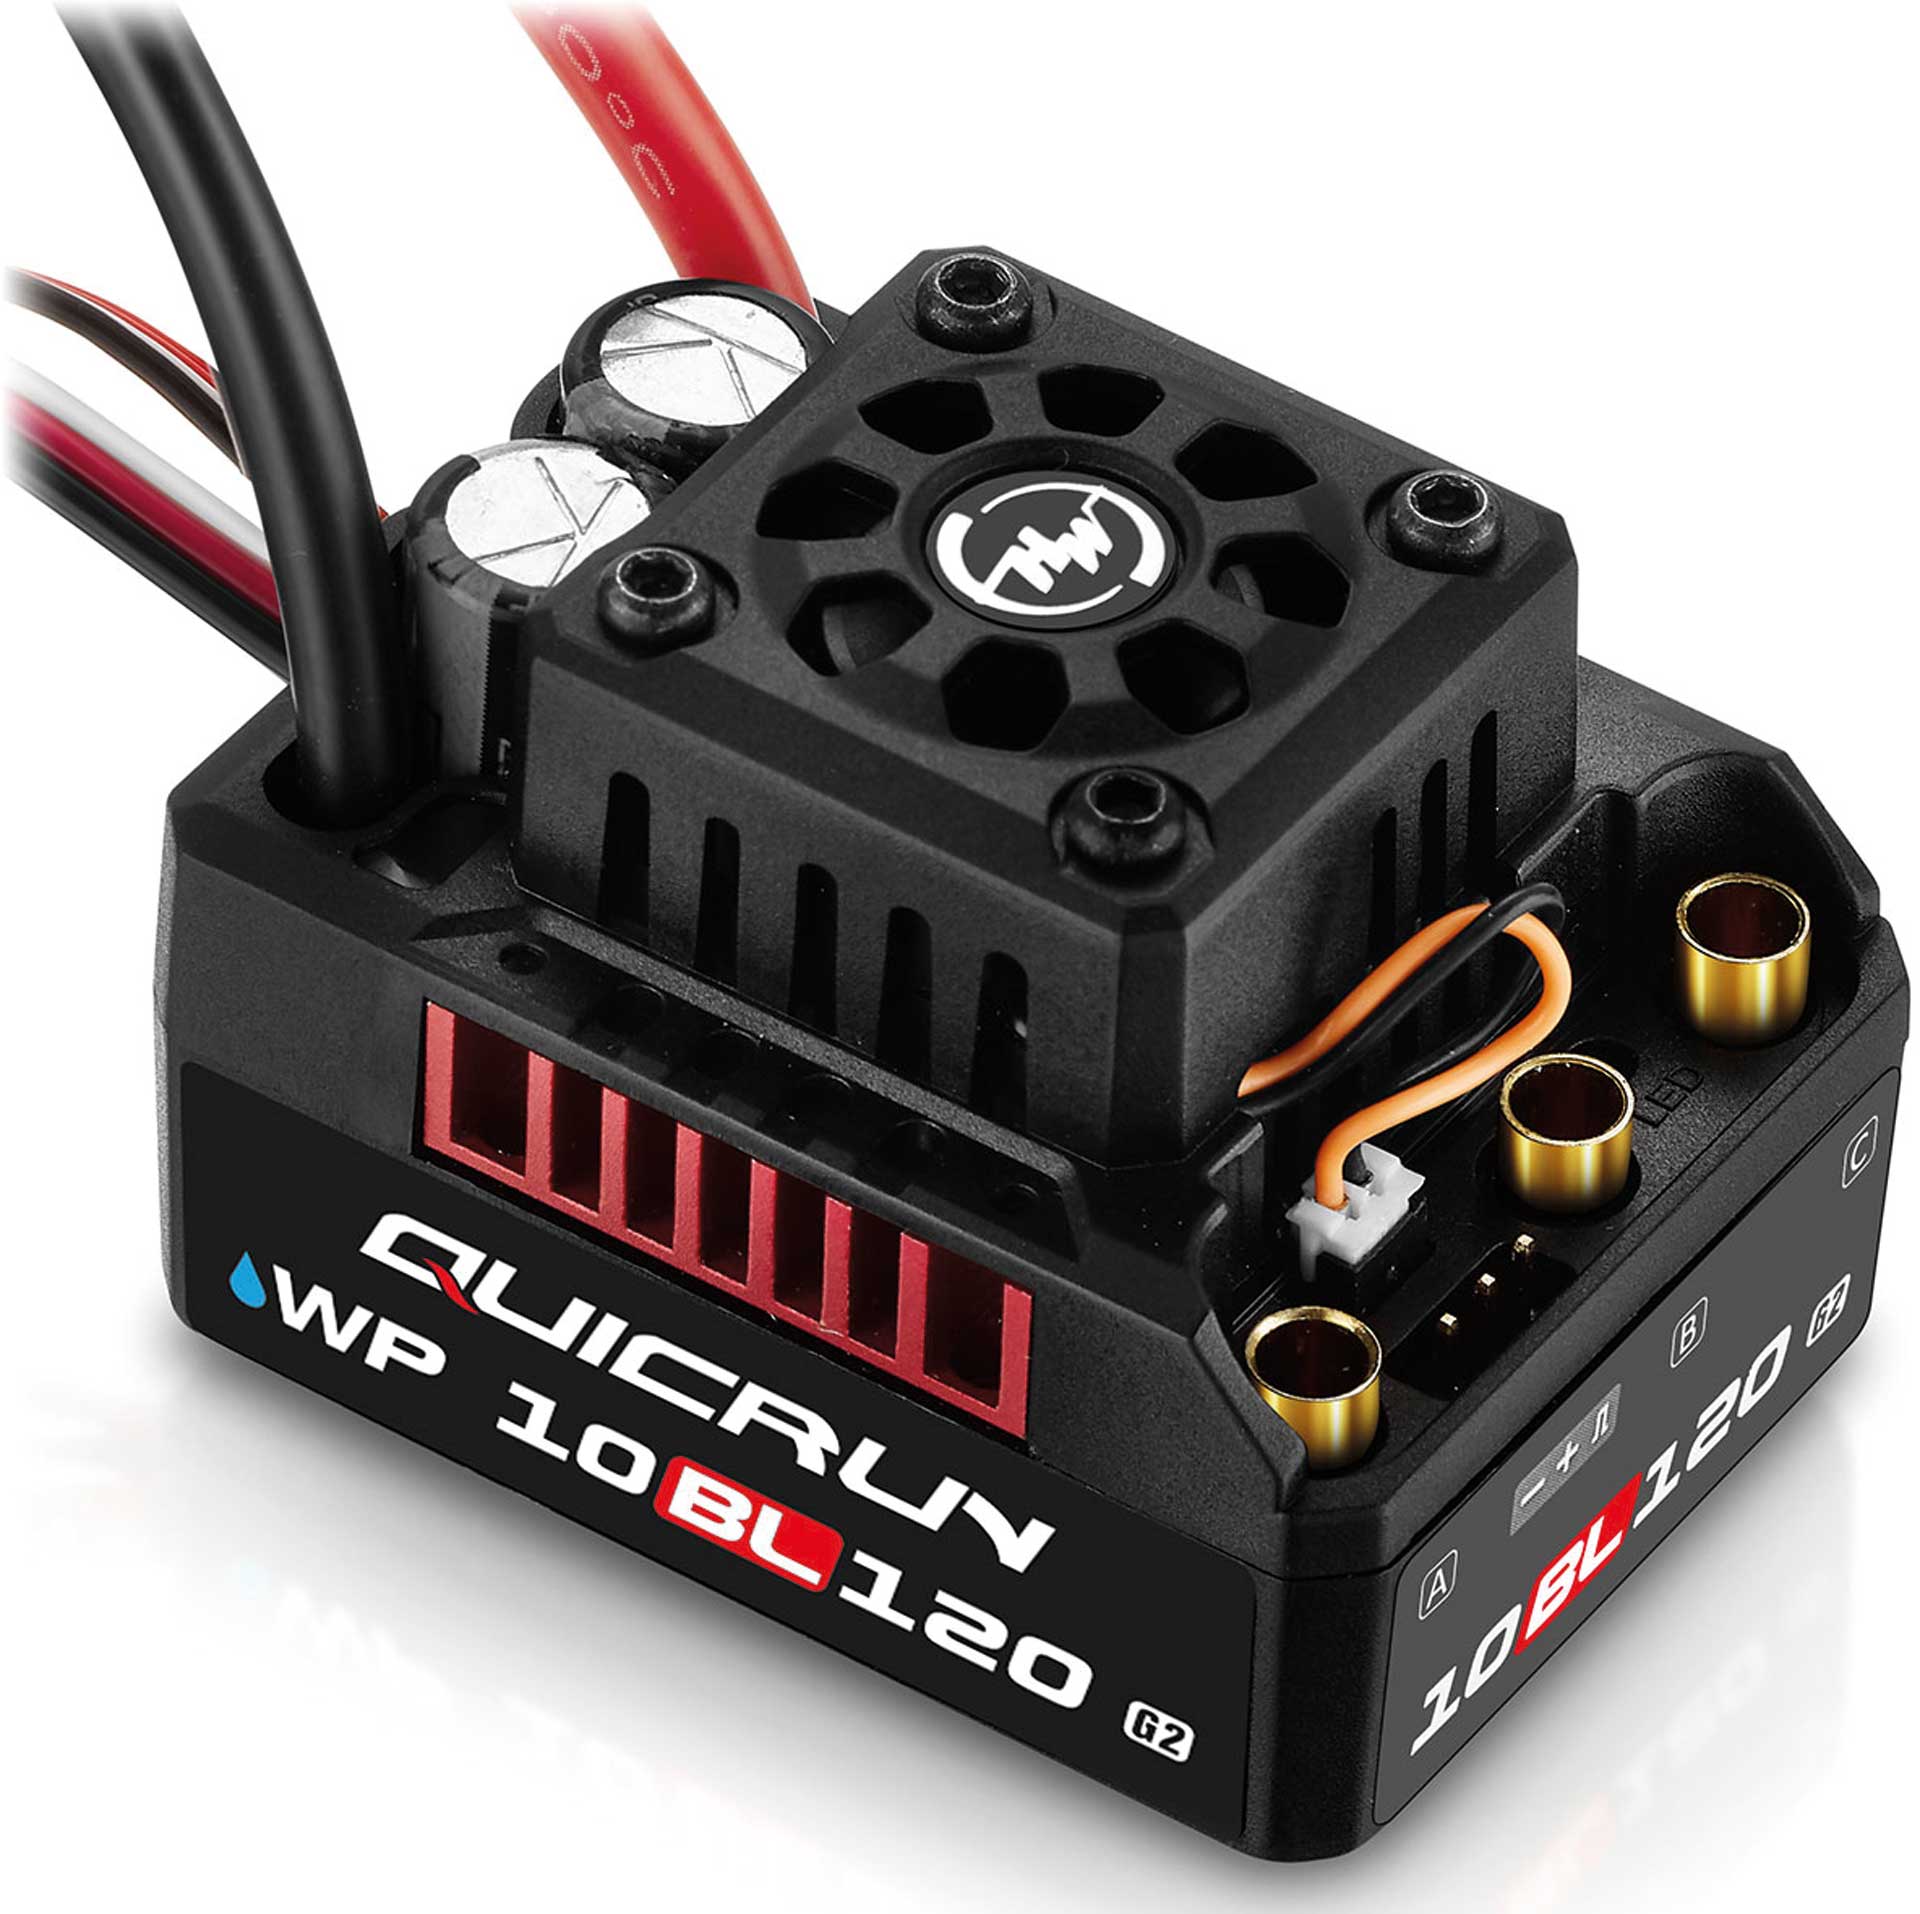 HOBBYWING QuicRun WP10BL120 G2 brushless speed controller 120A 2-4s